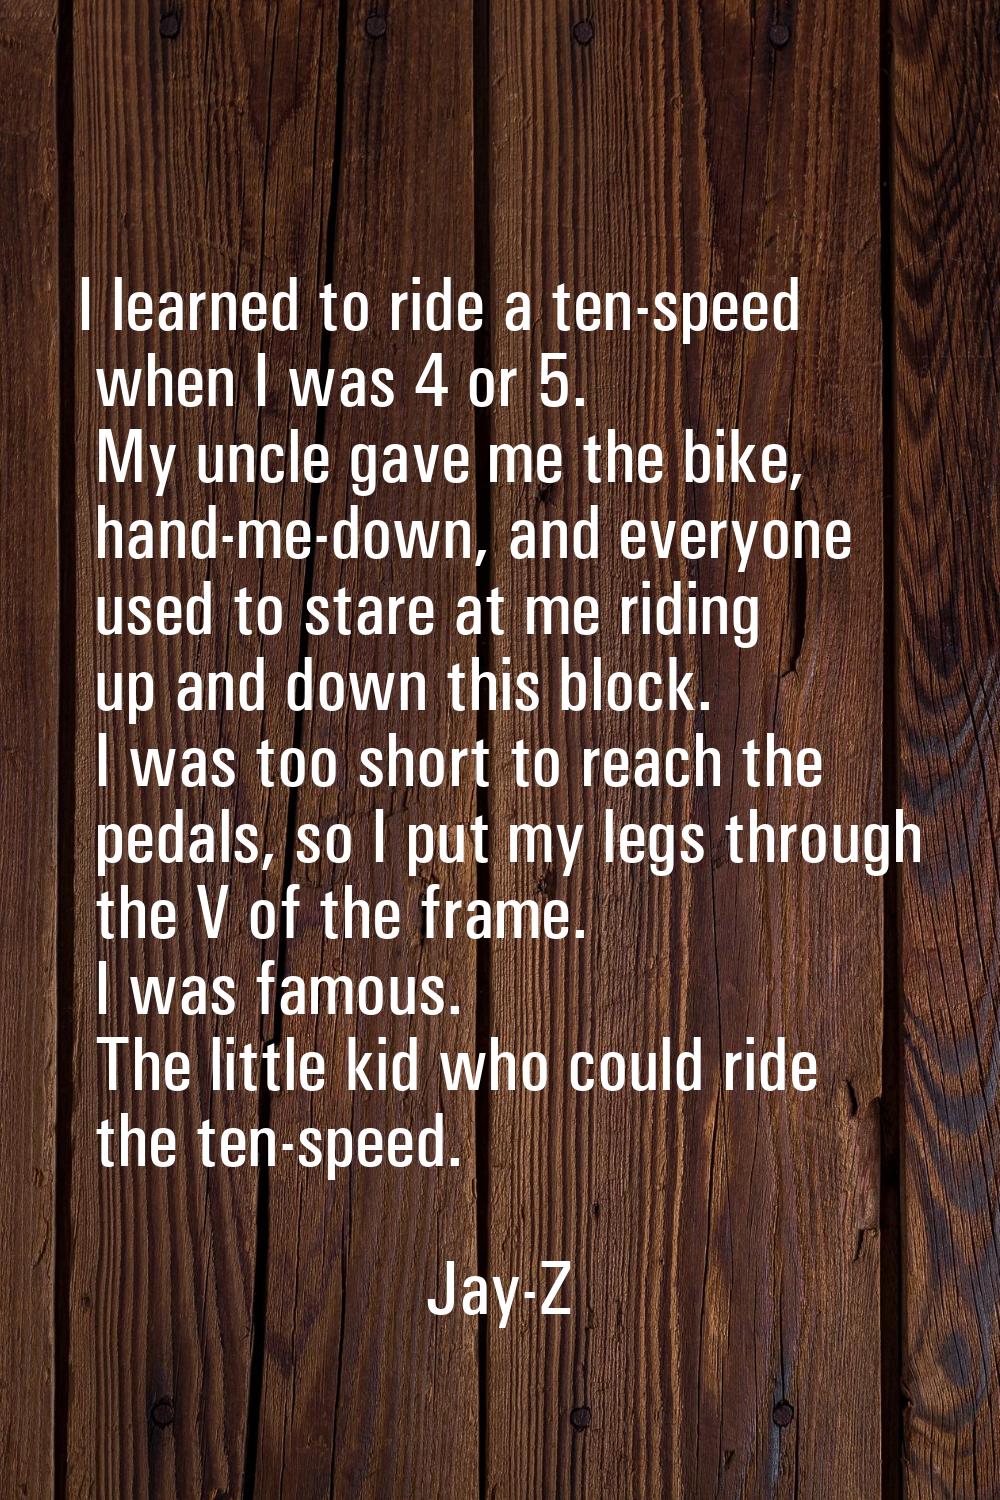 I learned to ride a ten-speed when I was 4 or 5. My uncle gave me the bike, hand-me-down, and every